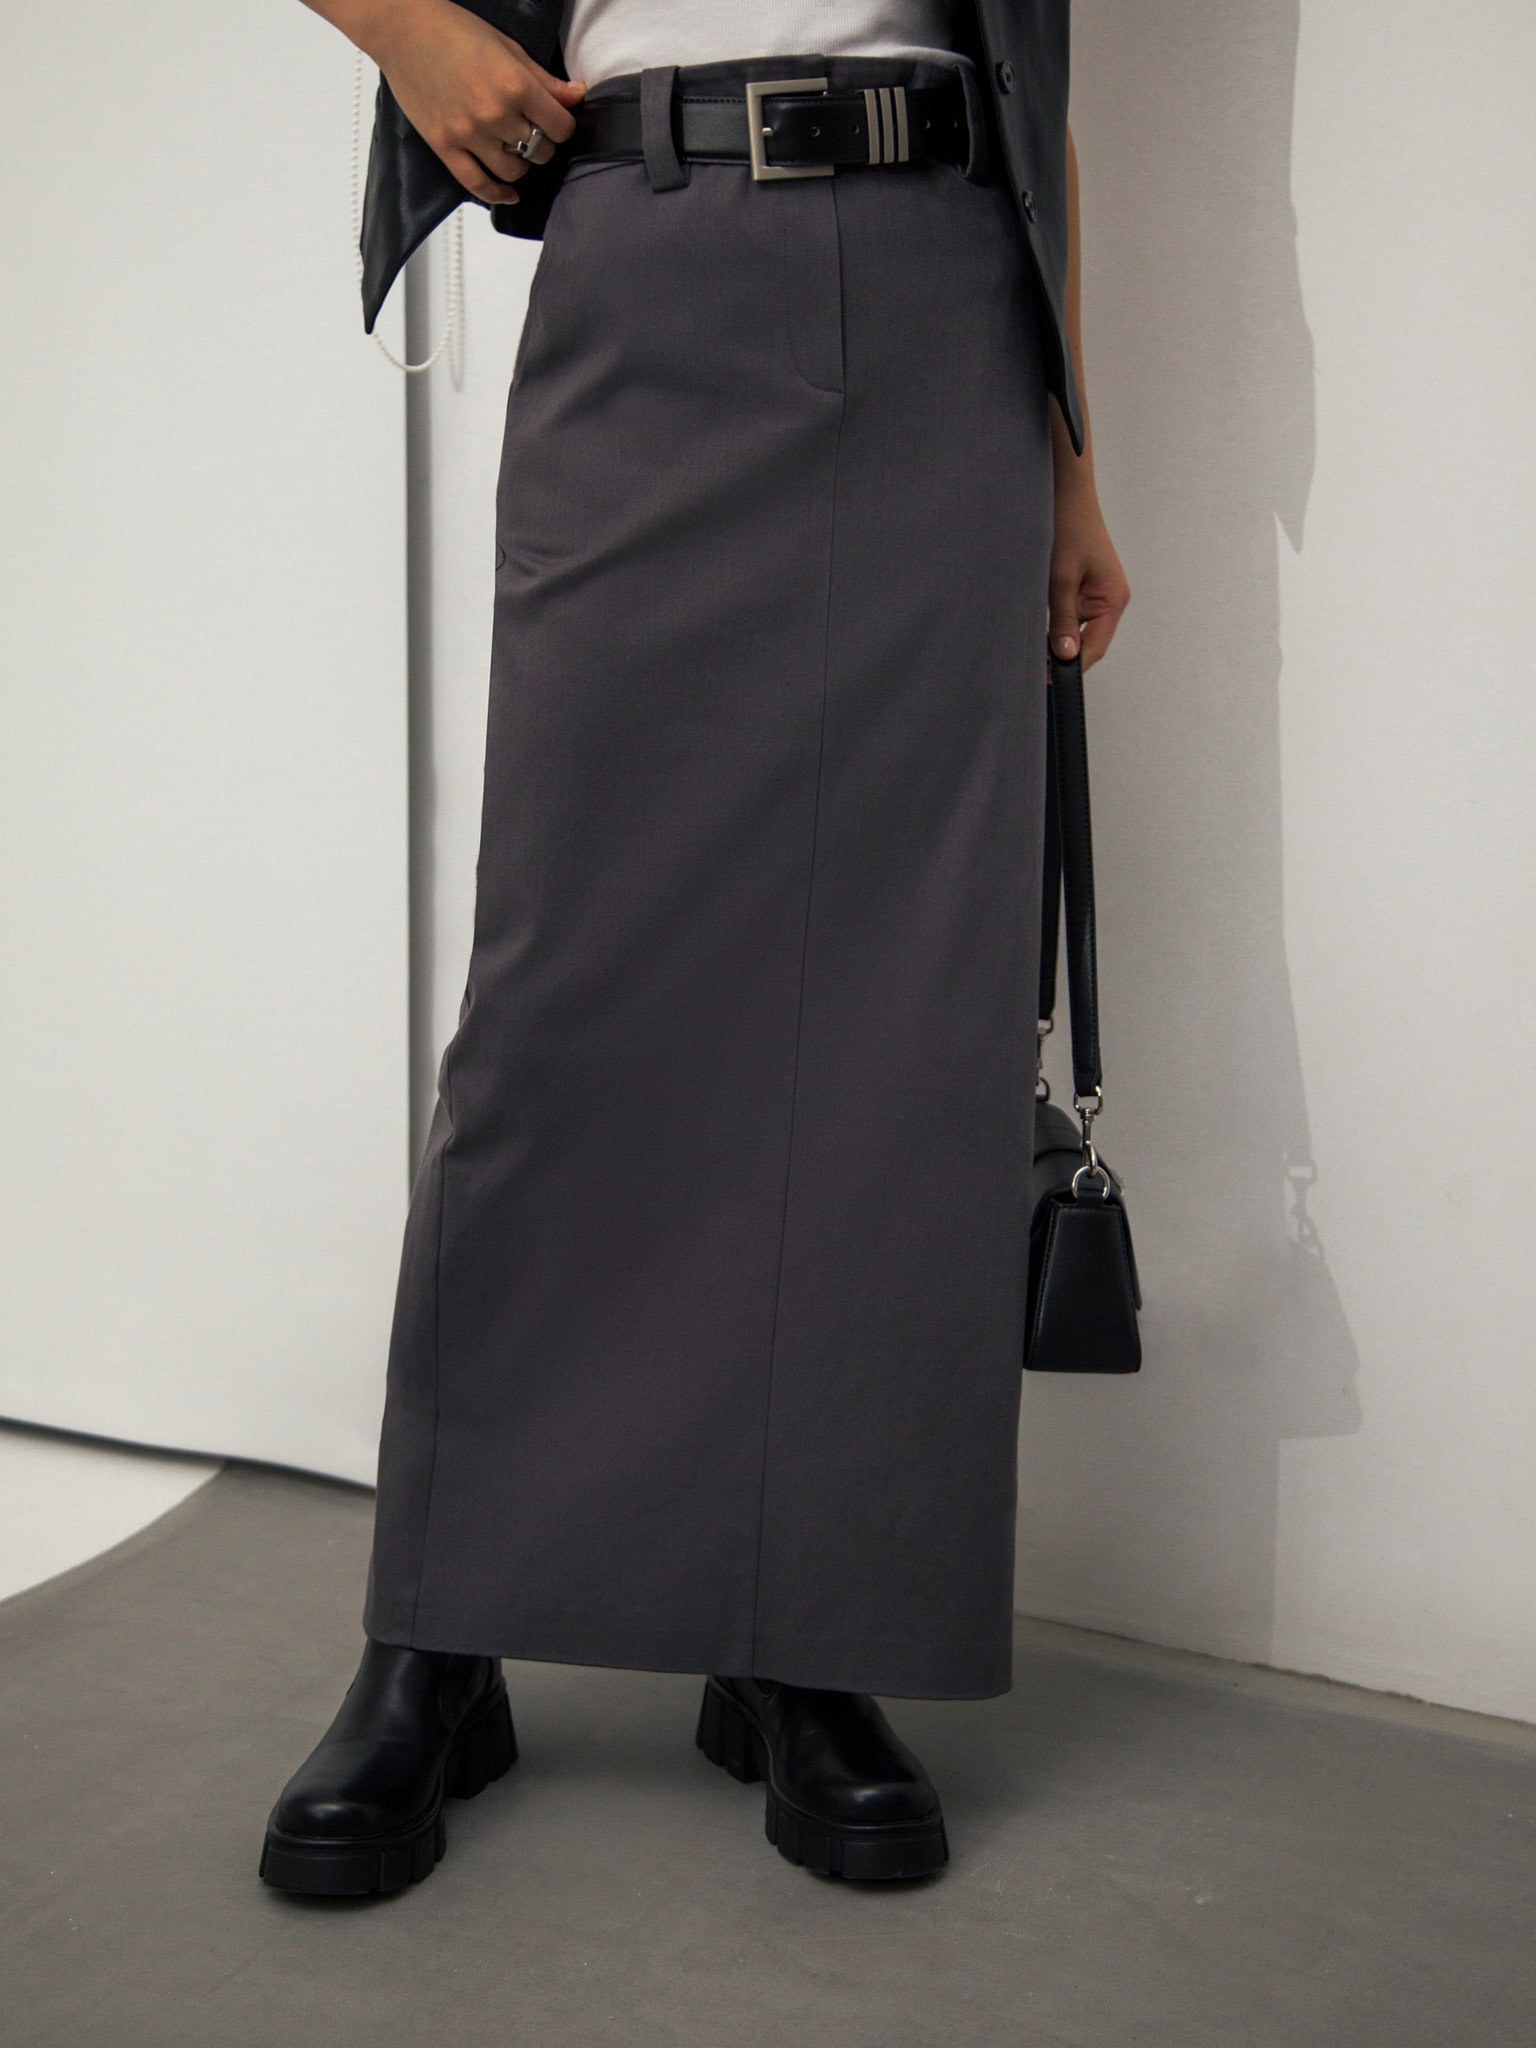 Maxi skirt in suiting fabric